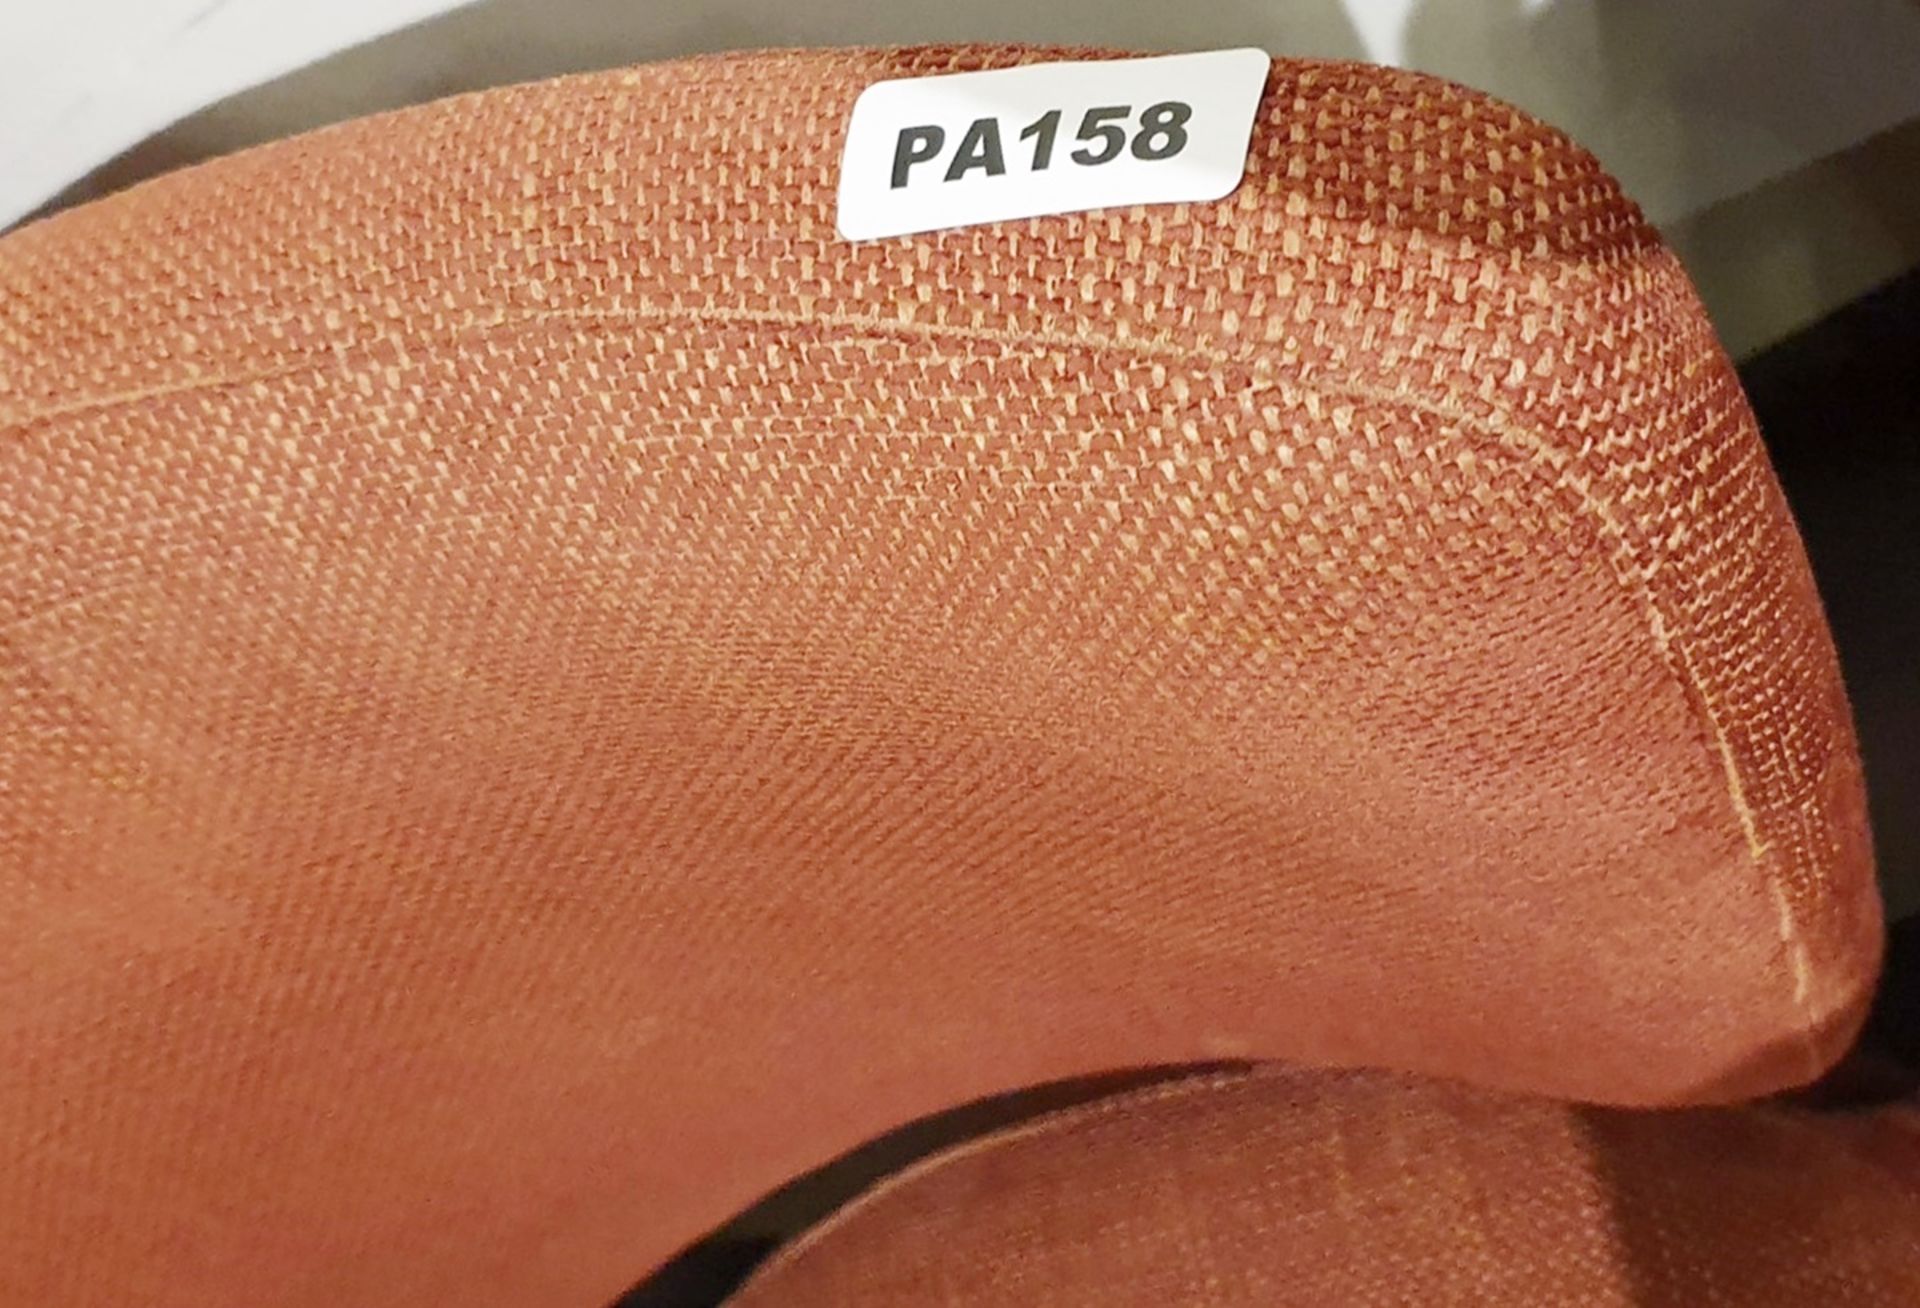 1 x Chair Upholstered in Salmon Fabric - Ref PA158 - CL463 - Location: Altrincham WA14 - Image 3 of 3